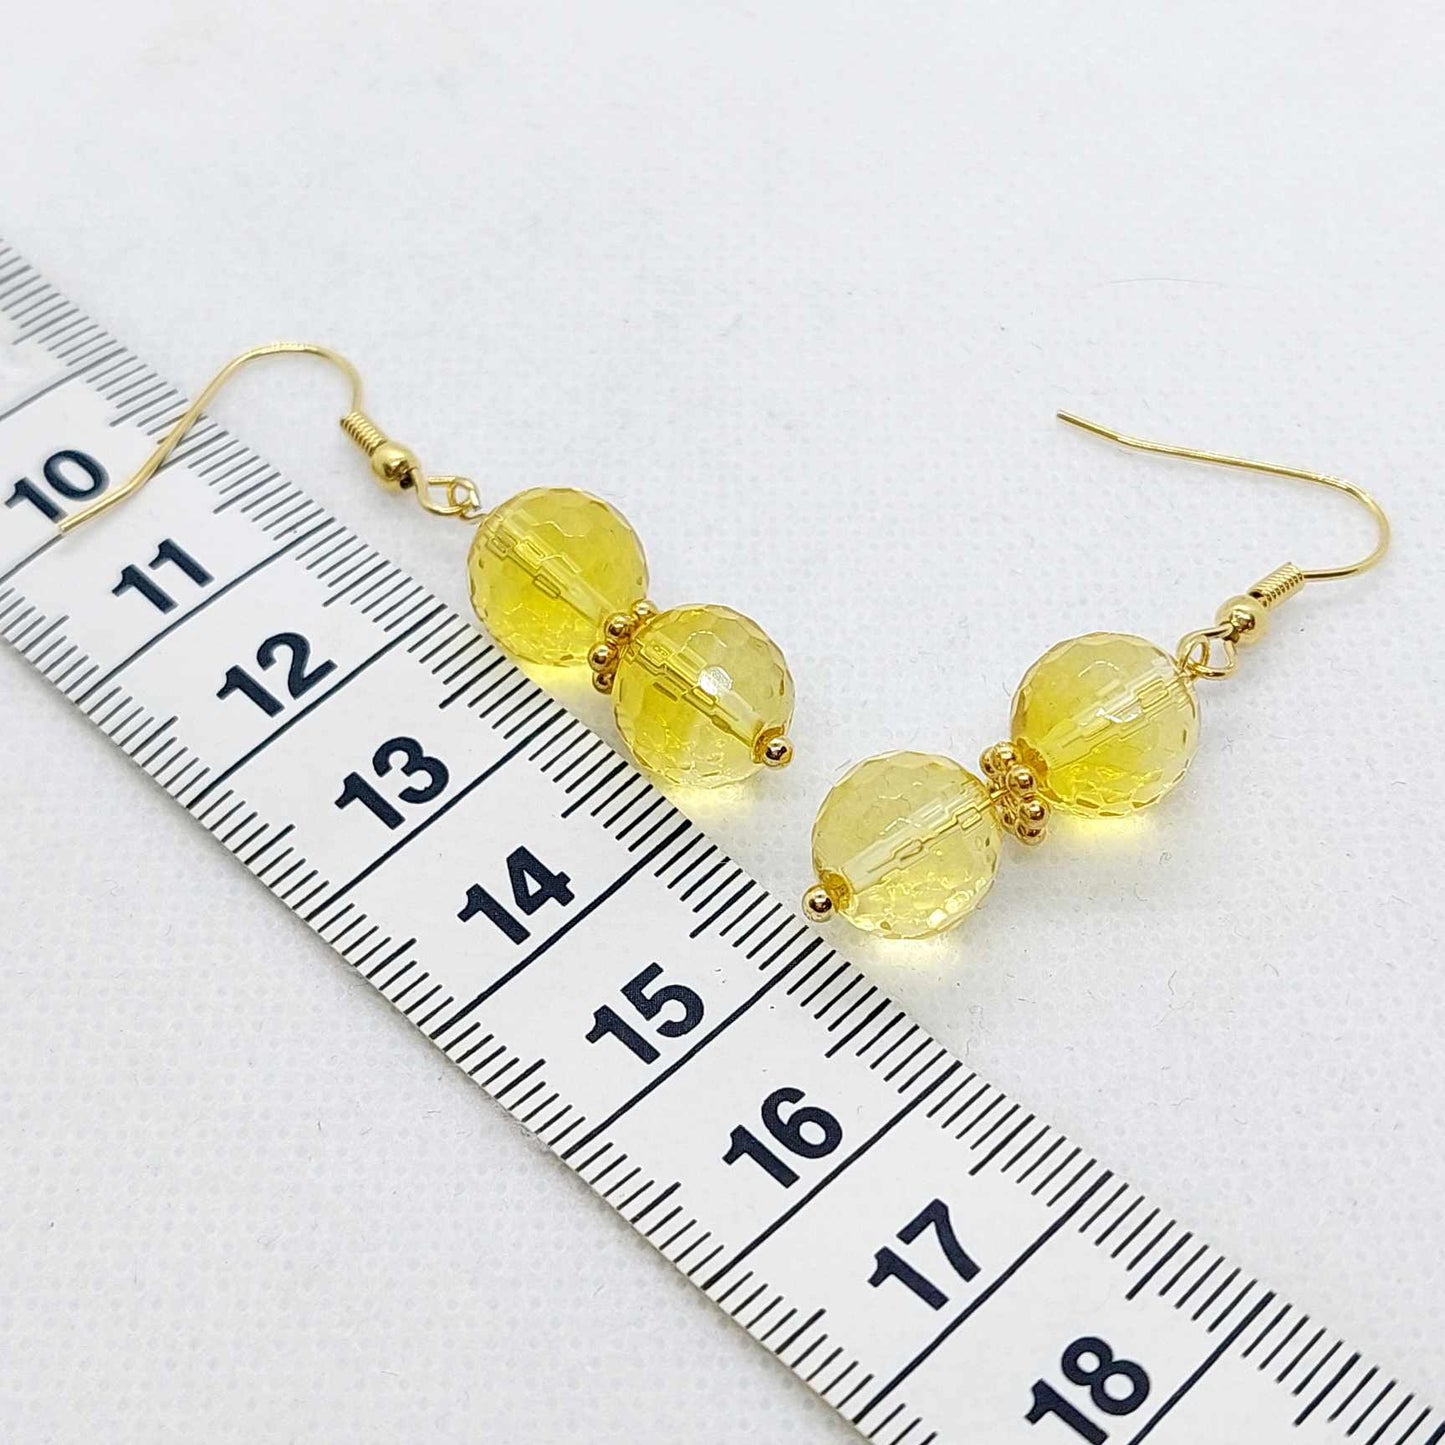 Natural Faceted Citrine Dangle Earrings with 10mm Stones in Stainless Steel Gold Plated